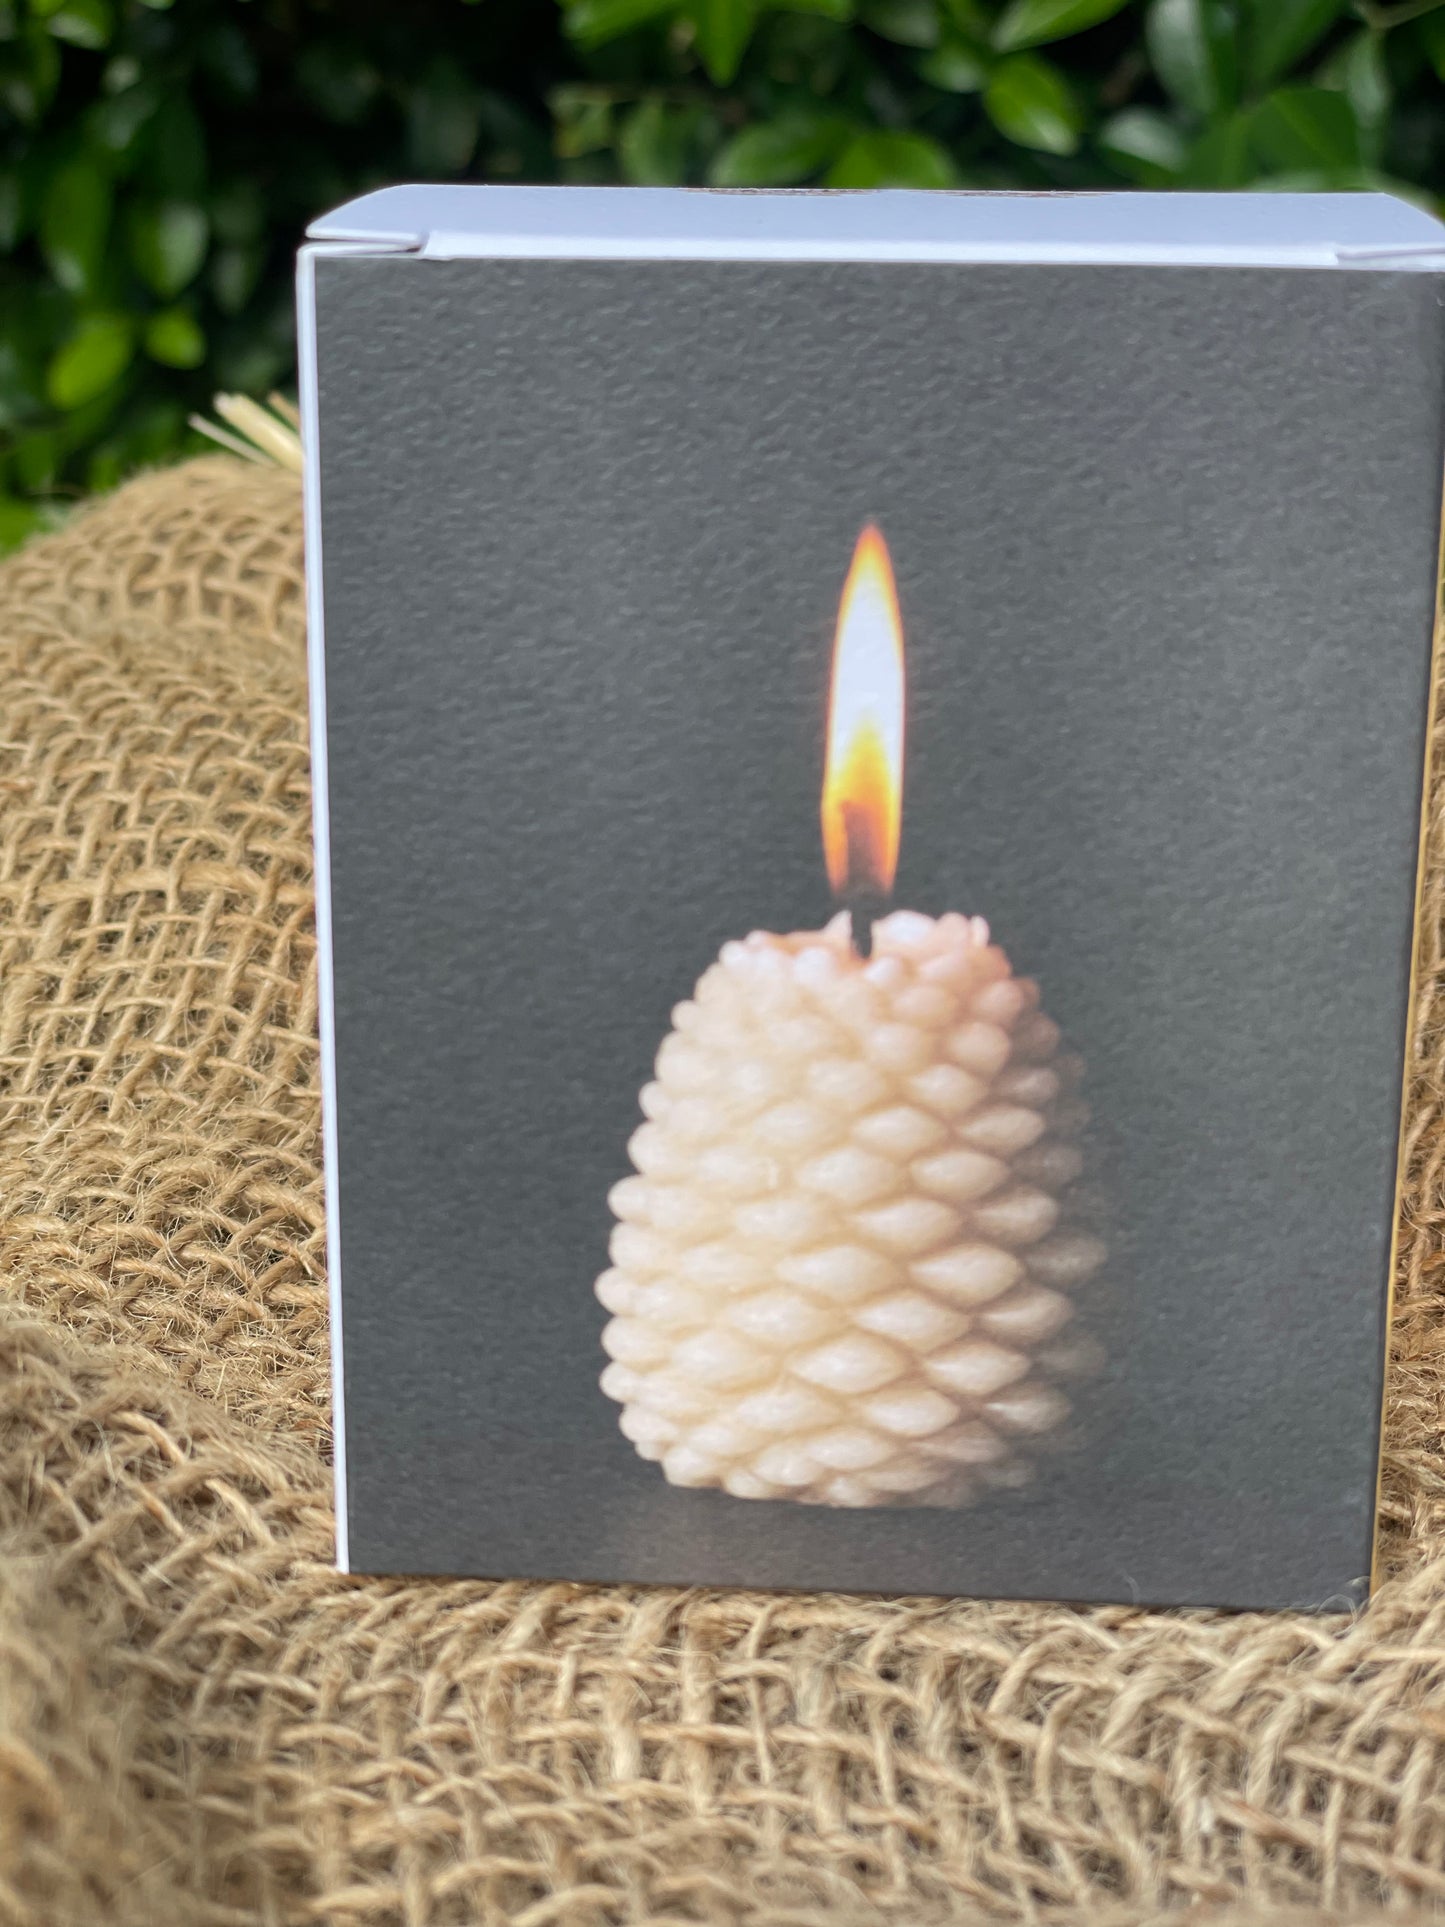 Queen B Pine Cone Bee's Wax Candle